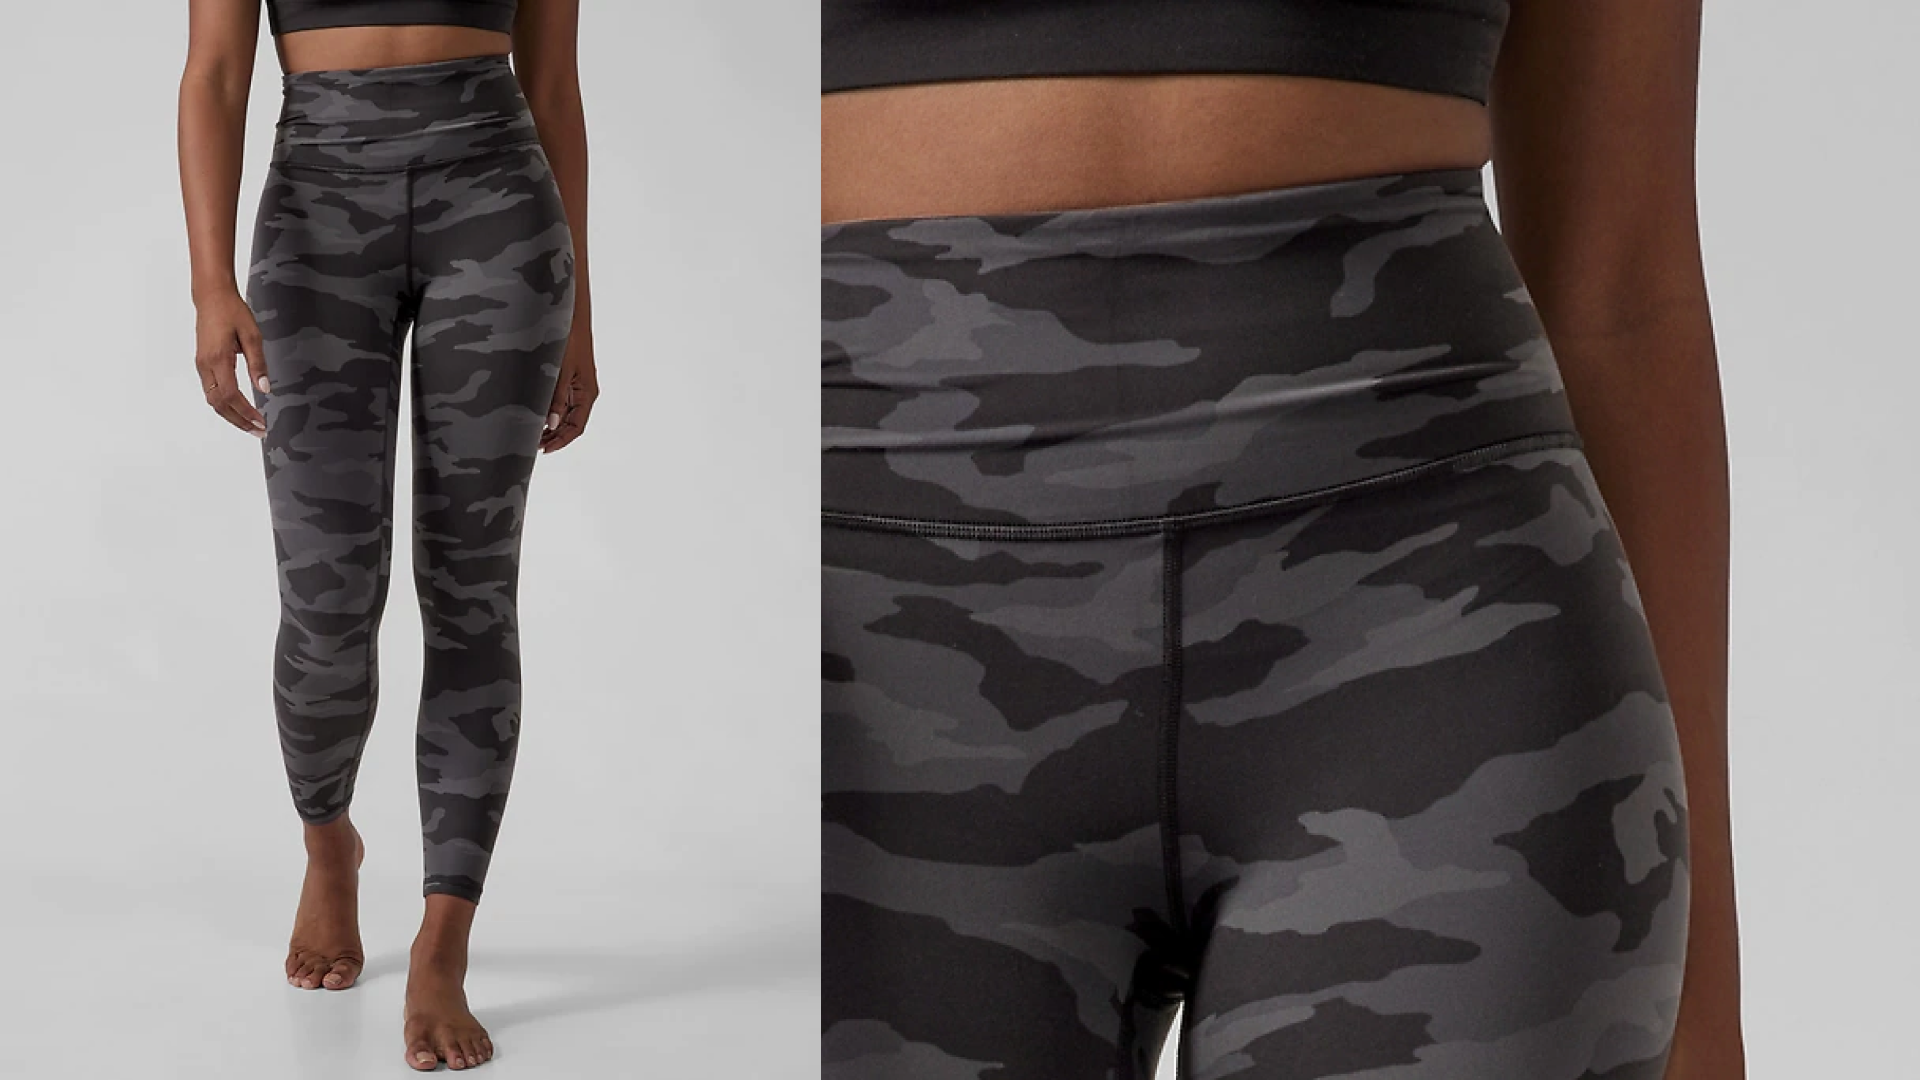 compressive leggings for workouts and runs